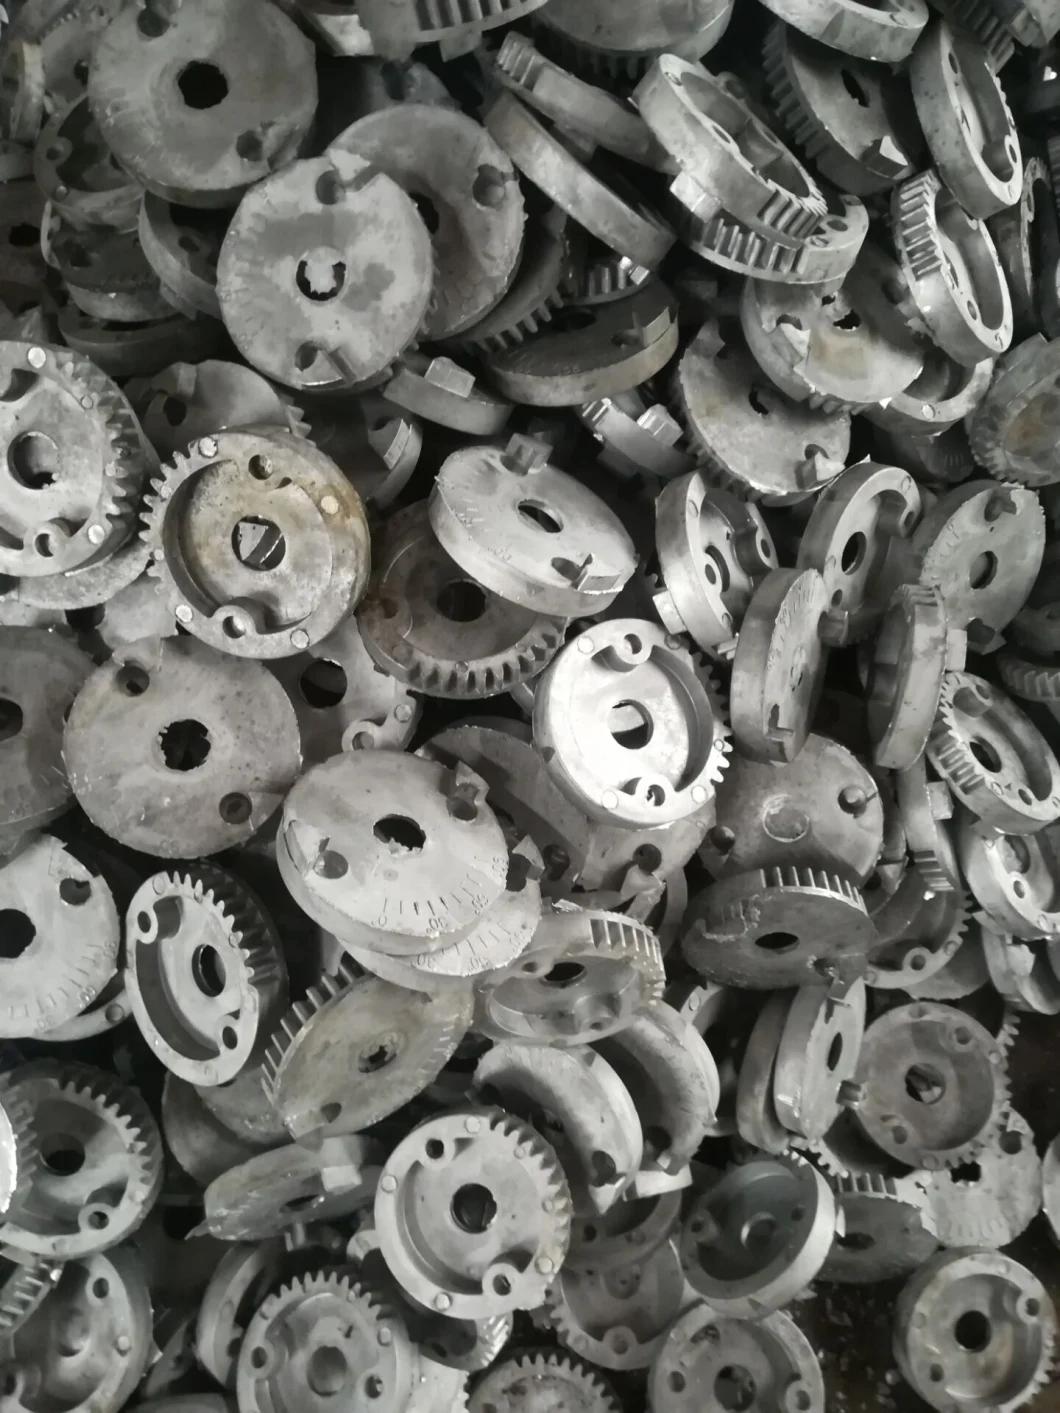 Teel/Gray/Grey /Ductile Iron Casting for Metal/Shell Mold/Sand Casting